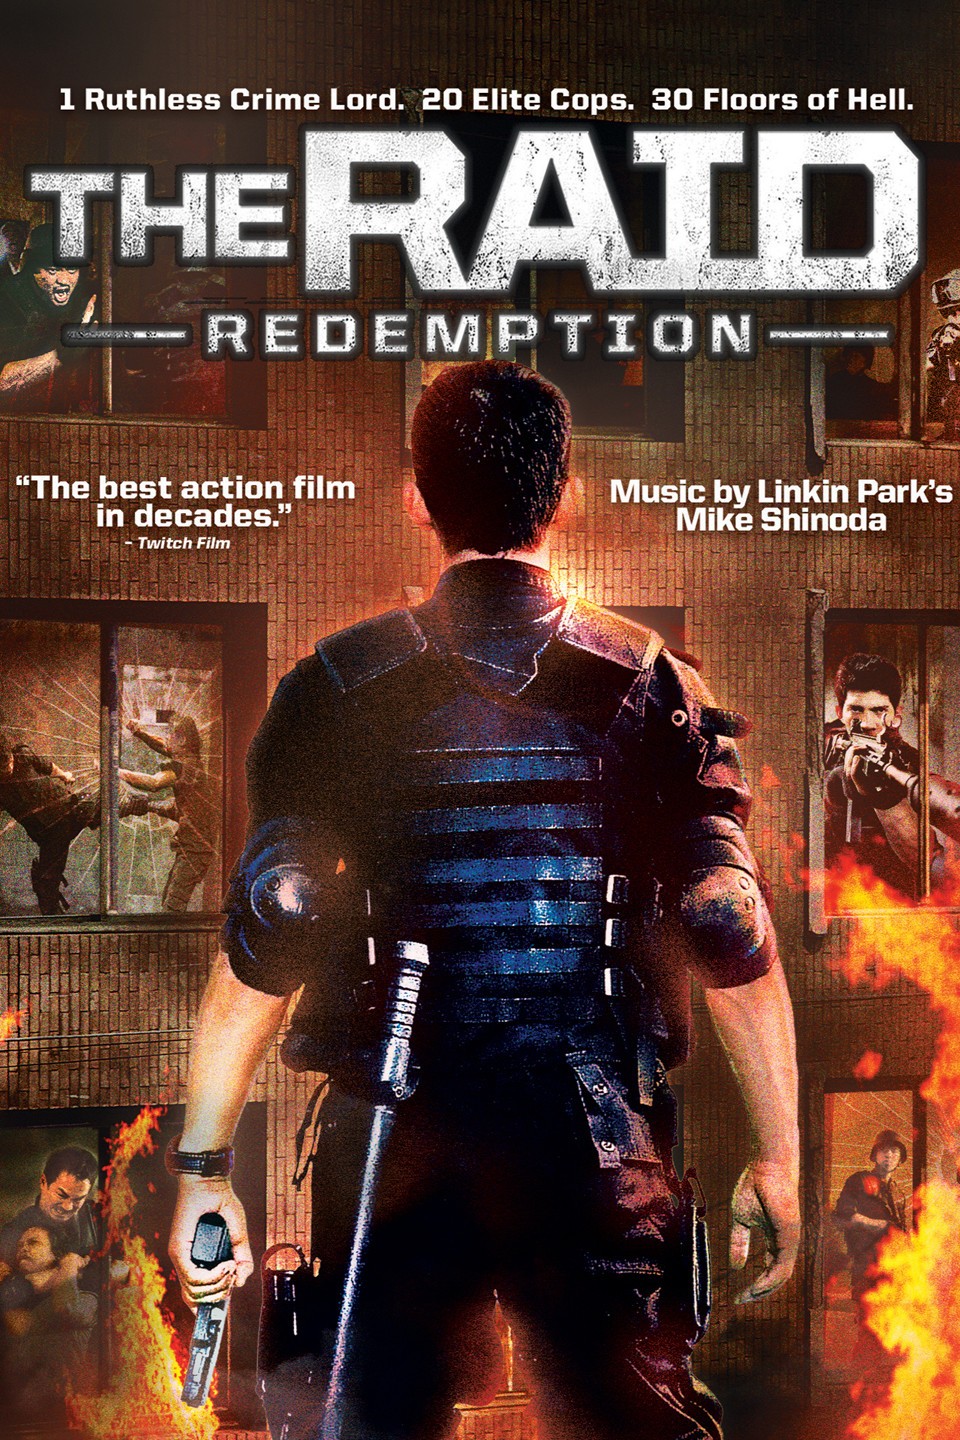 The Raid: Redemption - Rotten Tomatoes